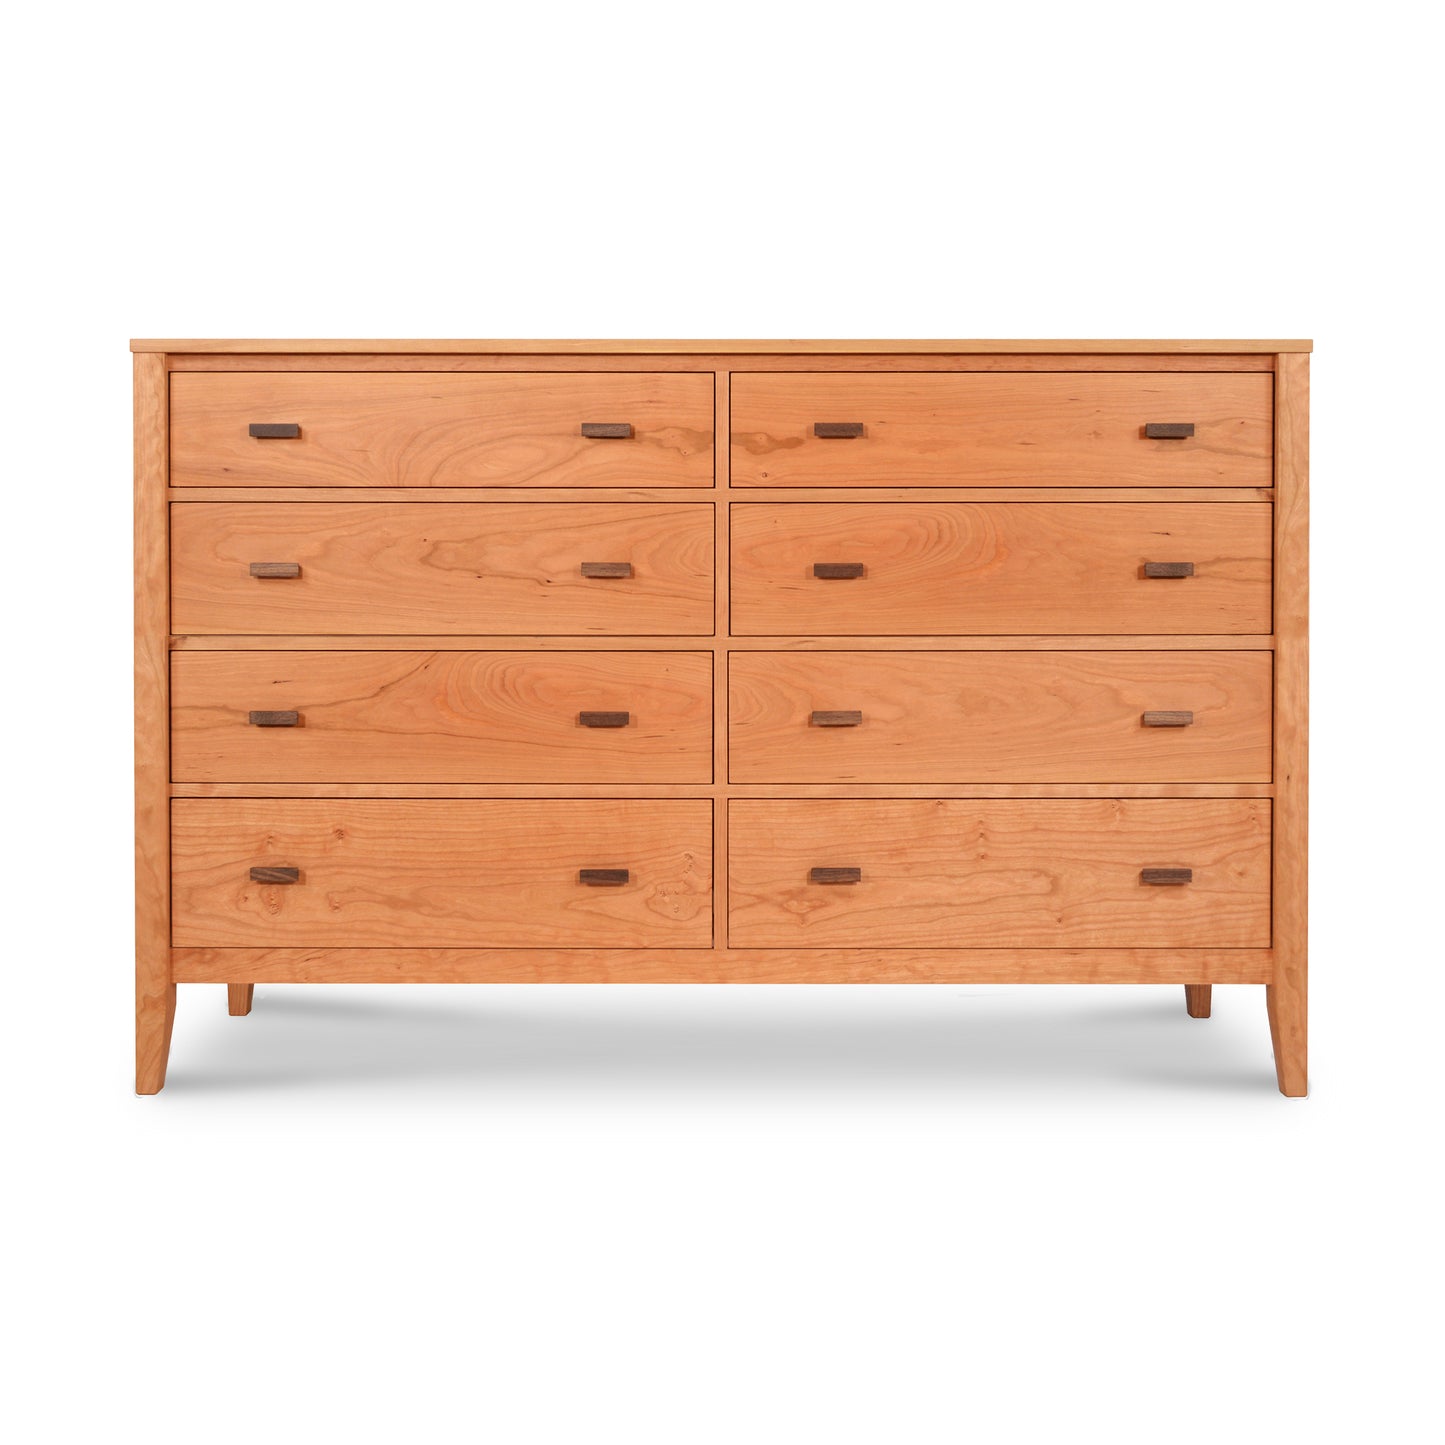 An eco-friendly dresser crafted from sustainably harvested materials, the Maple Corner Woodworks Andover Modern 8-Drawer Dresser features light-colored wood with black metal handles, positioned against a white background. This dresser boasts a